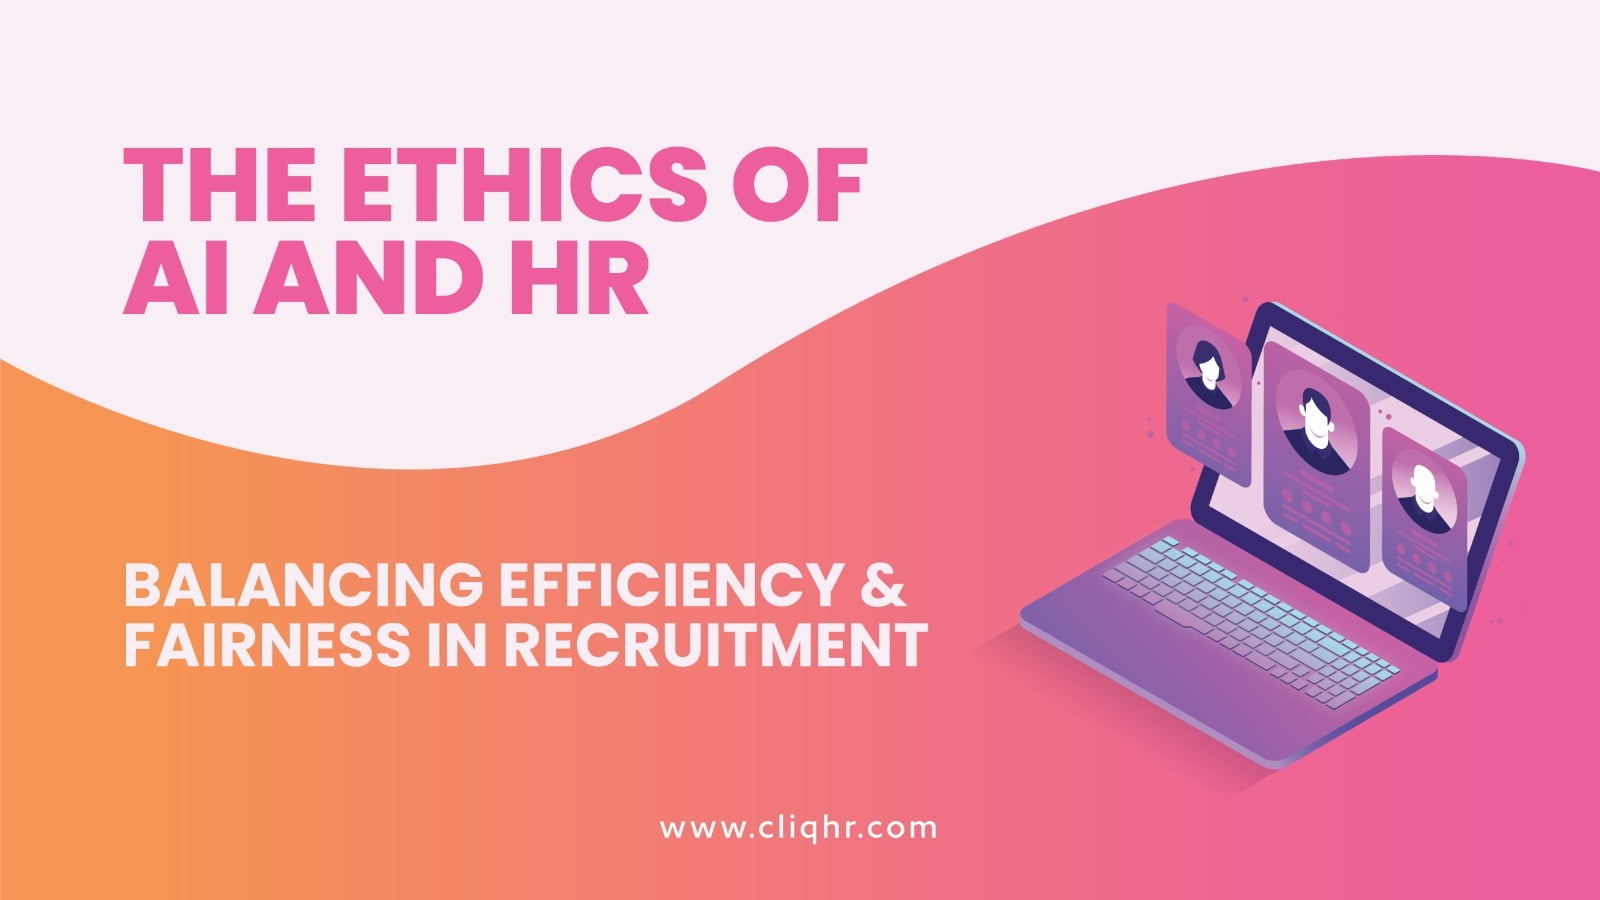 The ethics of AI and HR: Balancing efficiency and fairness in recruitment